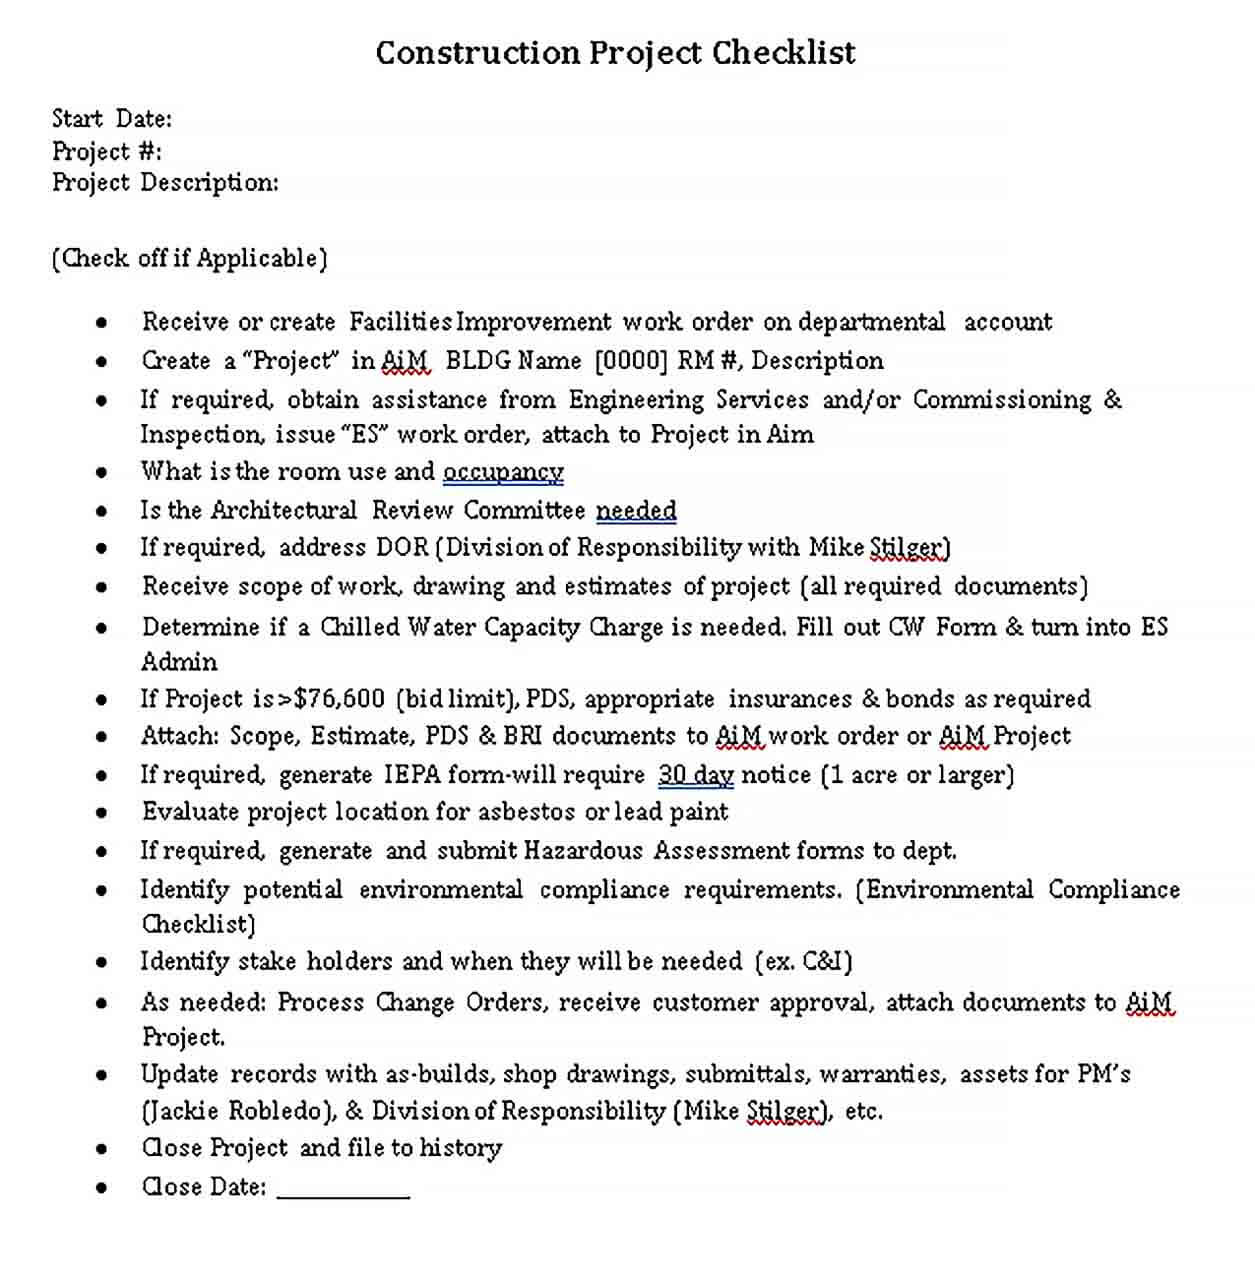 Sample Construction Project Checklist Template